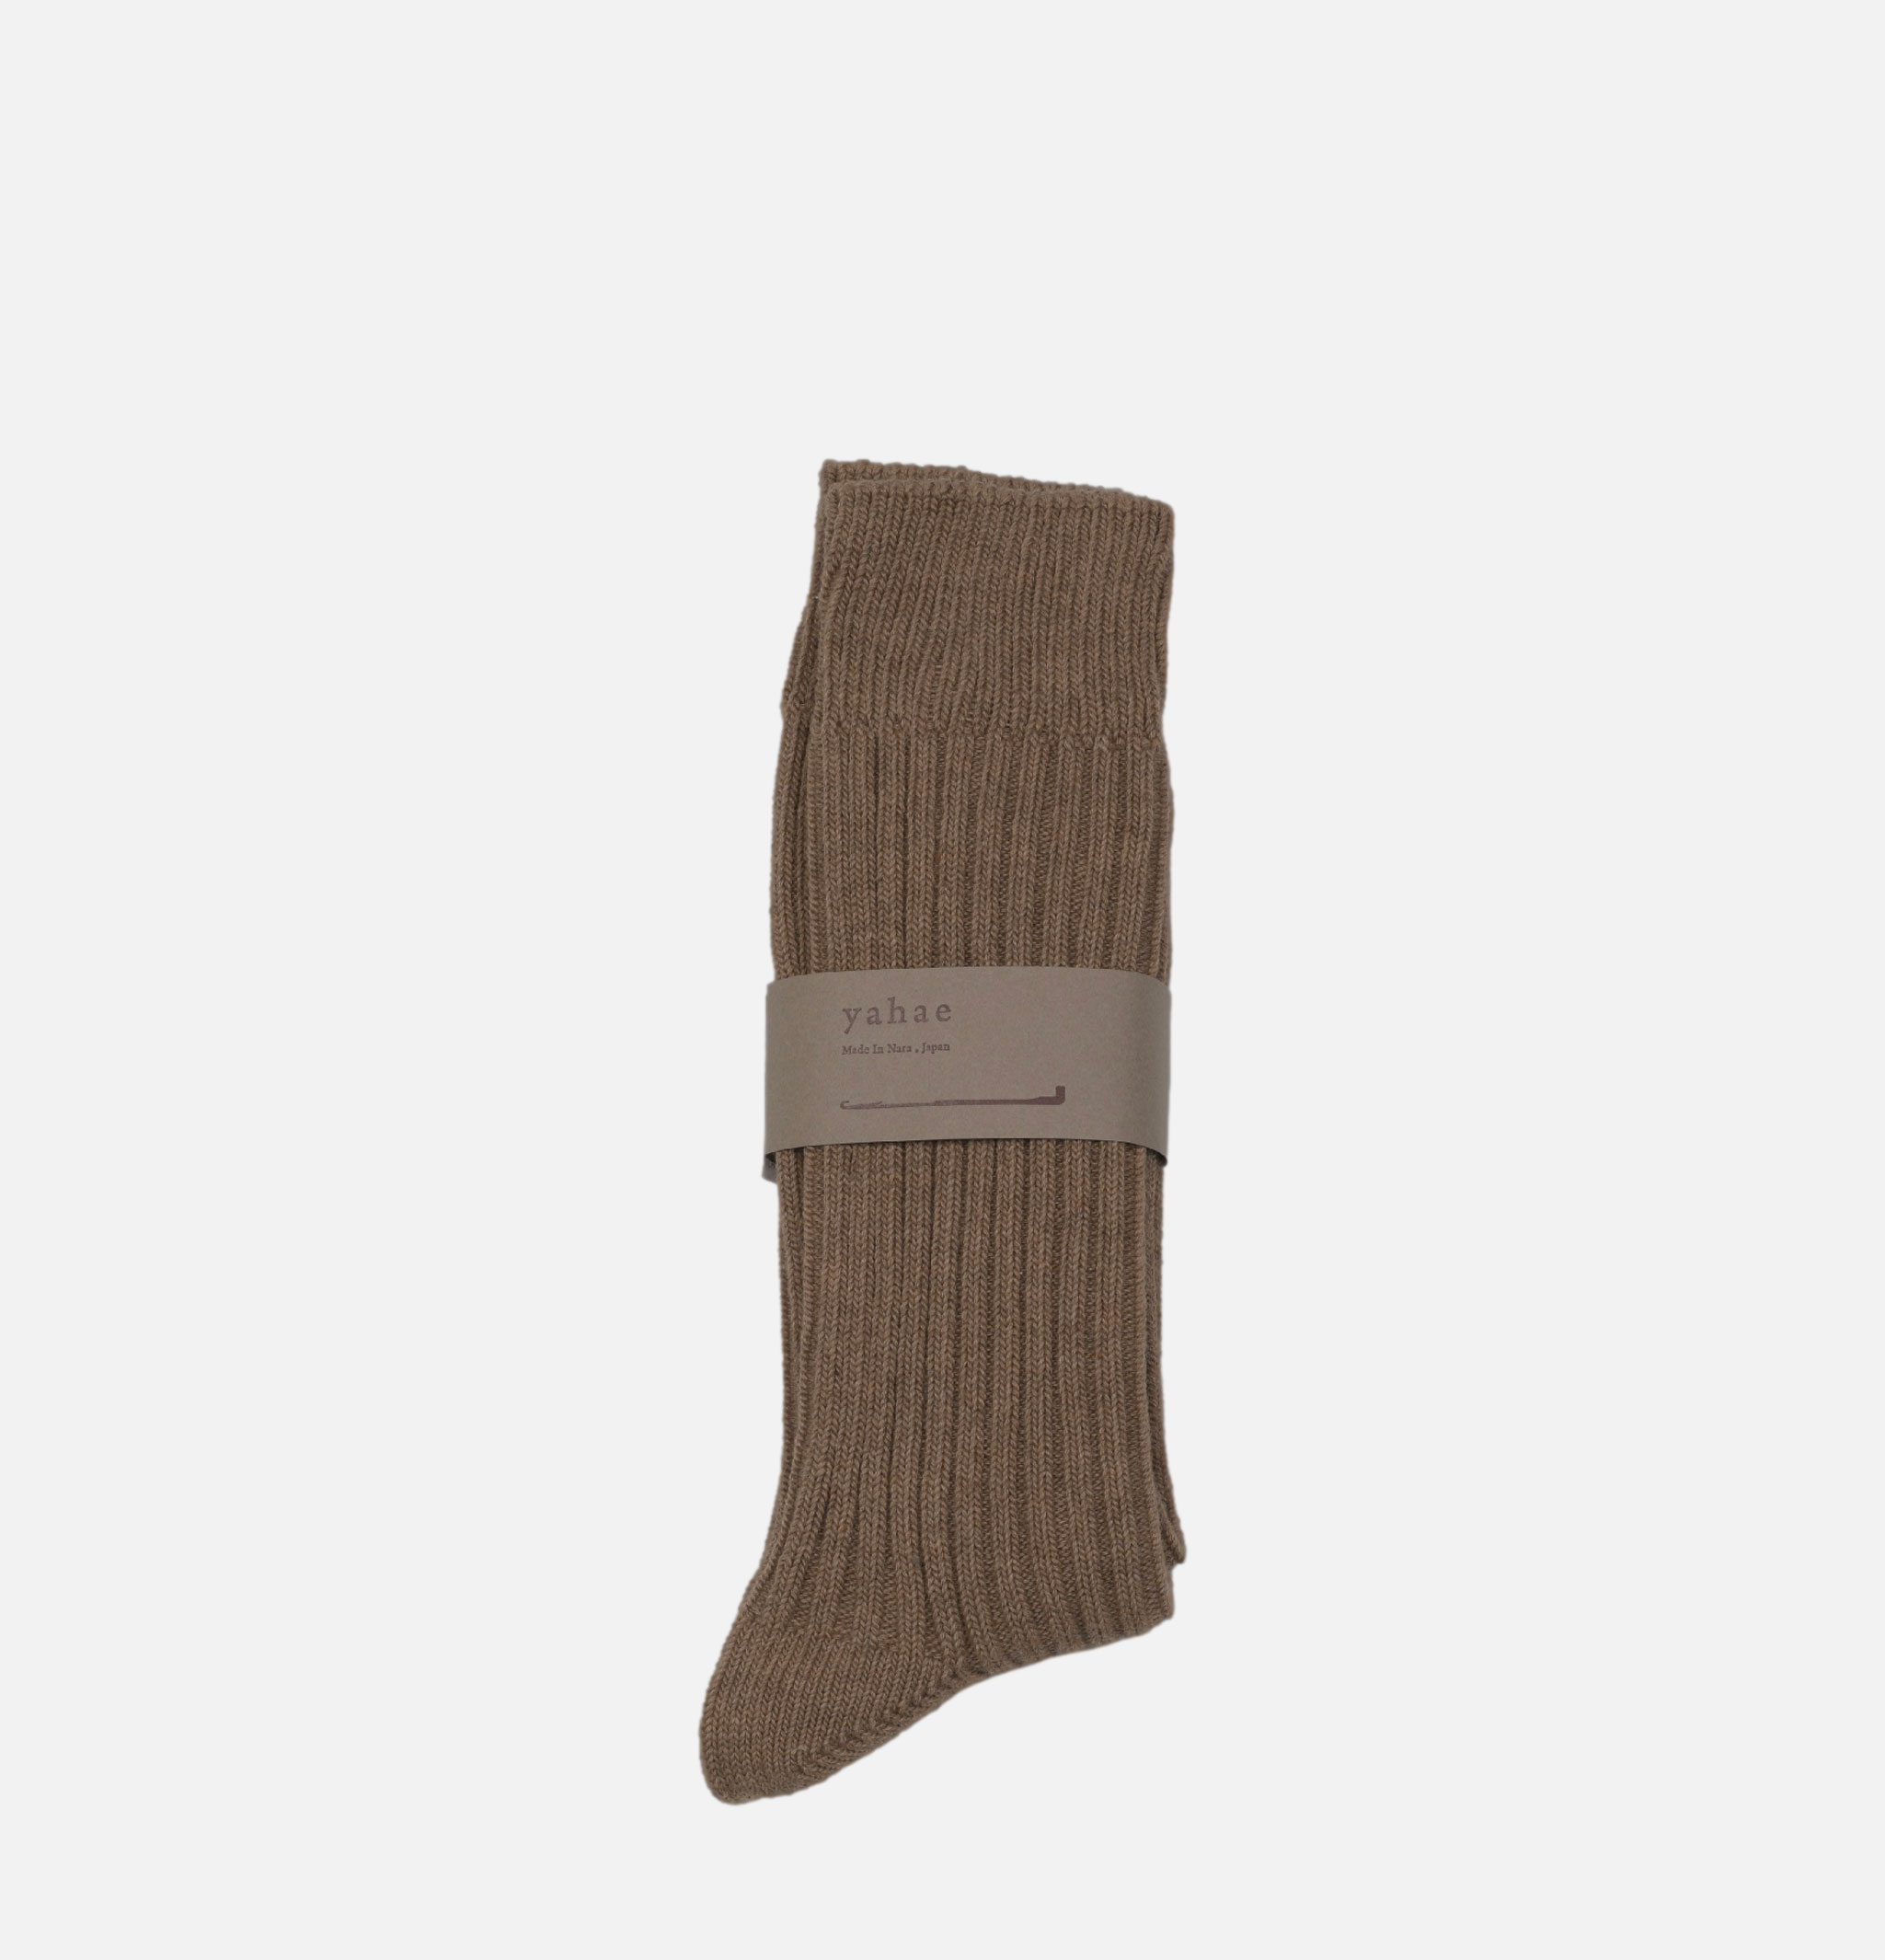 Chaussettes Yahae Japan Yak Ribbed Brown.